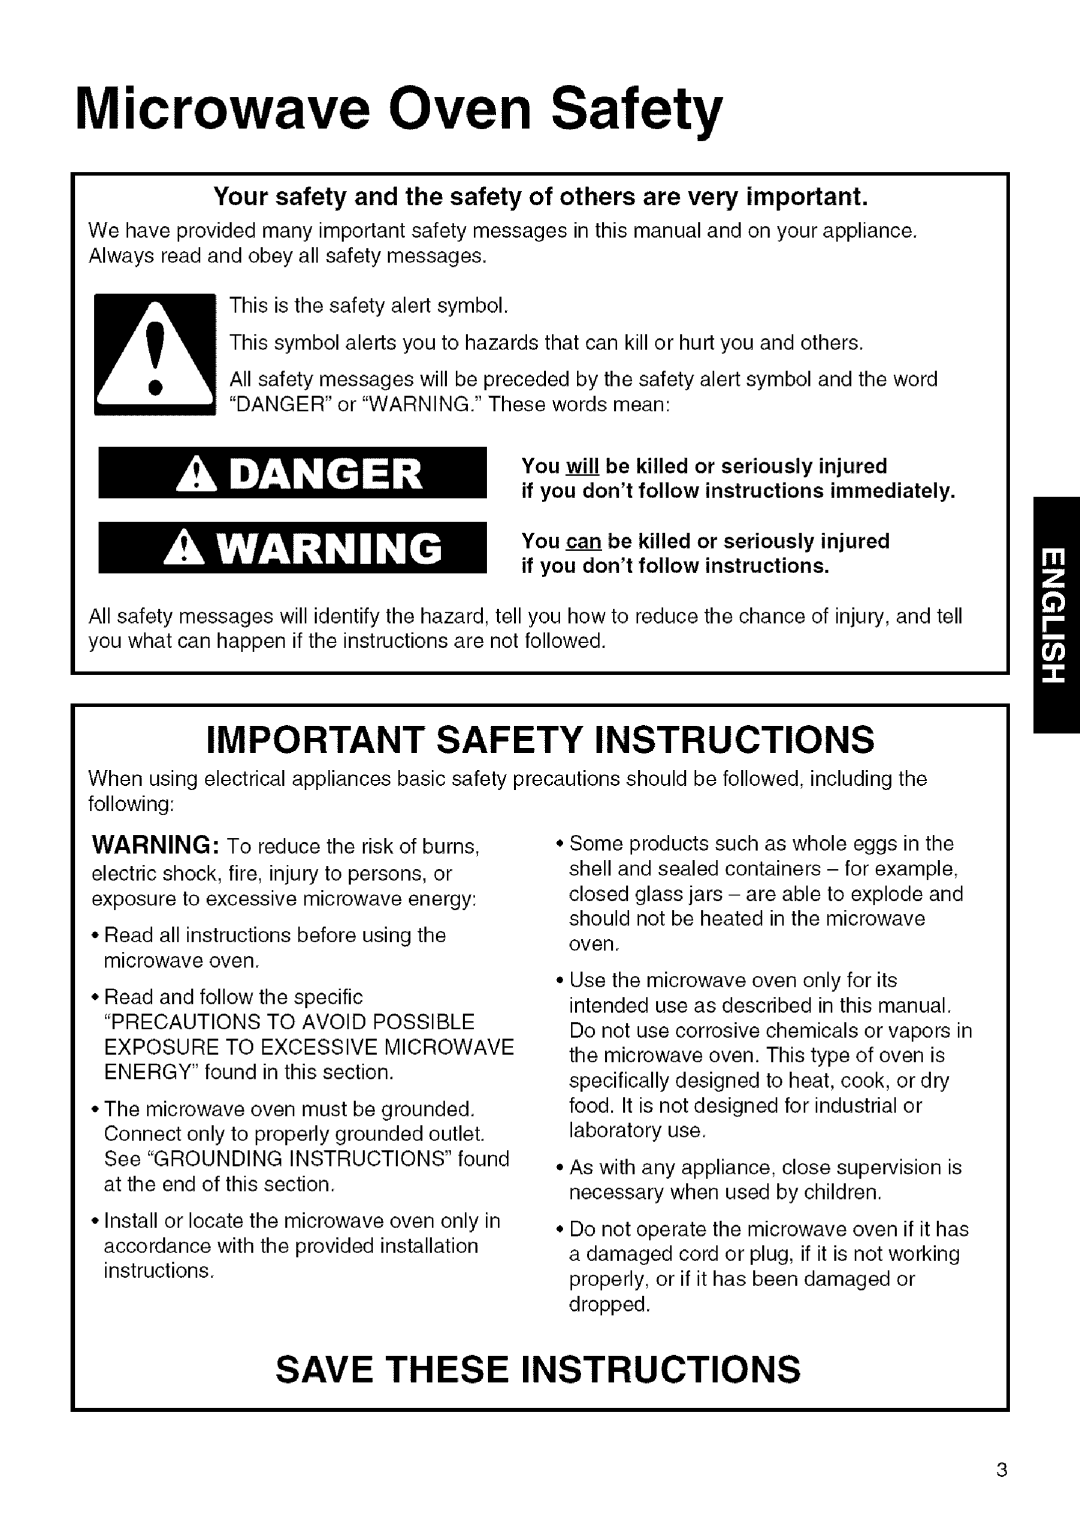 Kenmore 721.80829, 721.80824, 721.80823 manual Microwave Oven Safety, Important Safety Instructions, Save These Instructions 